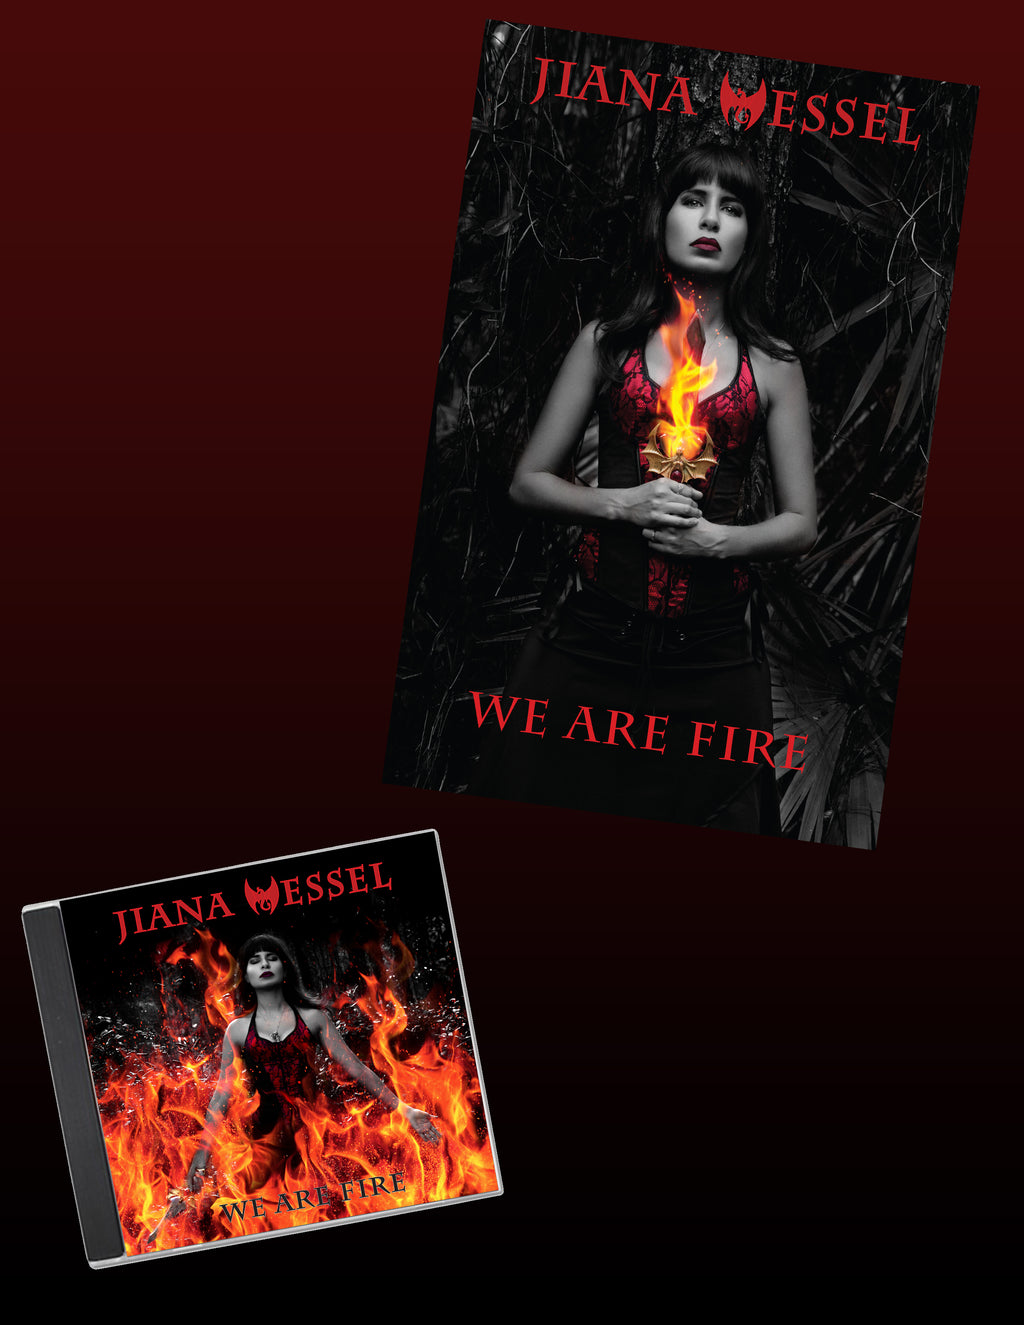 Set your world on fire! With the We Are Fire CD and 11 X 14 Poster Bundle